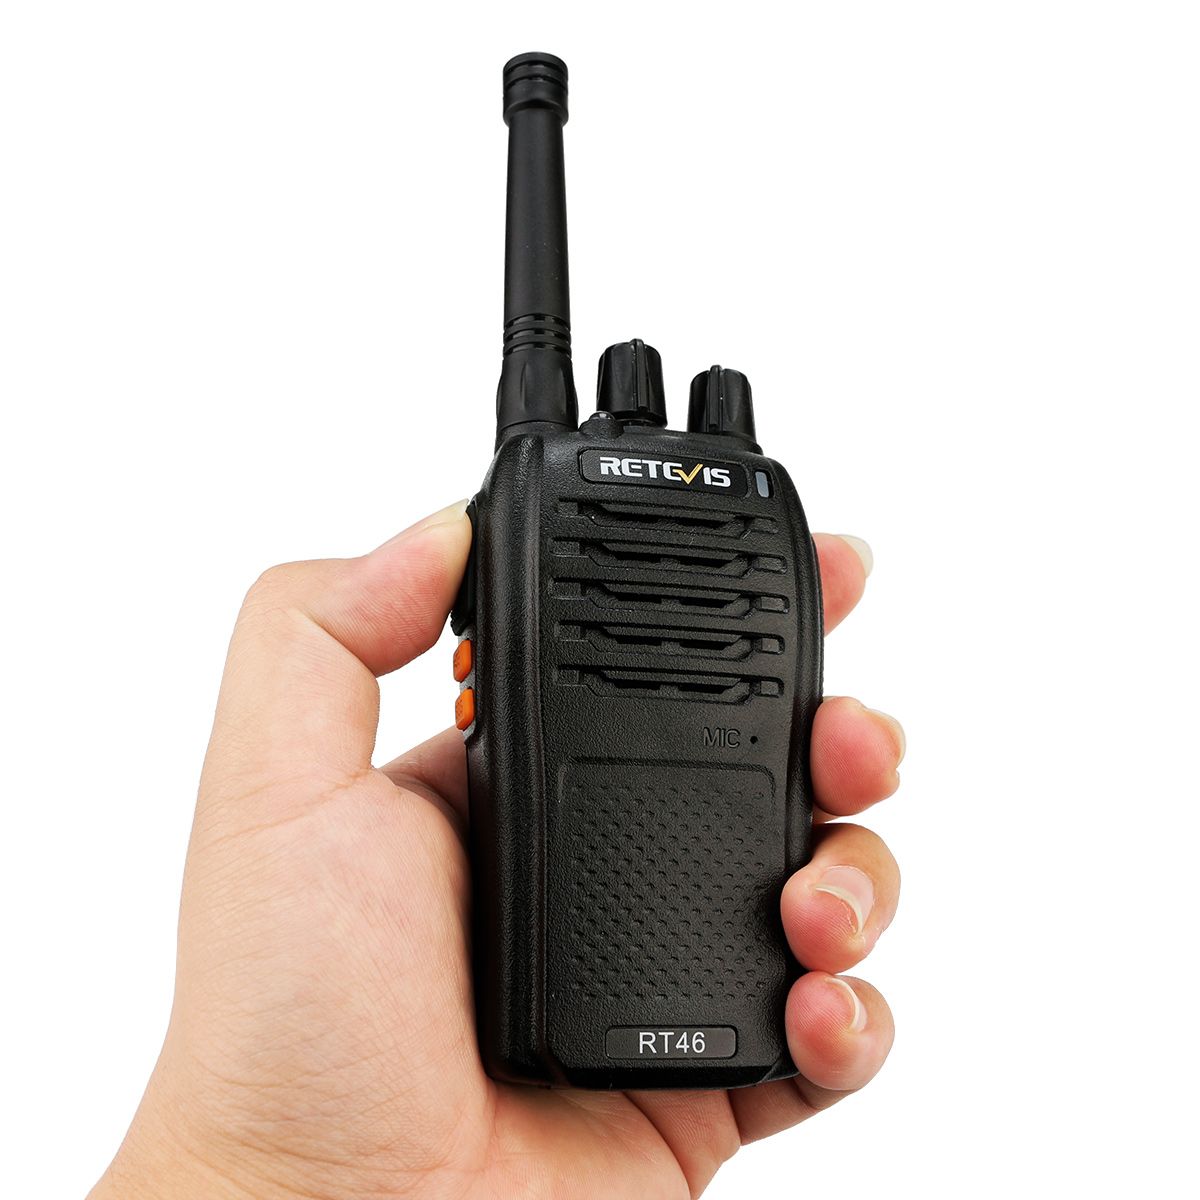 Retevis-RT46-License-free-Walkie-Talkie-FRS-Monitor-Scan-SOS-Alarm-Two-Way-Radio-Station-With-USB-Ch-1454228